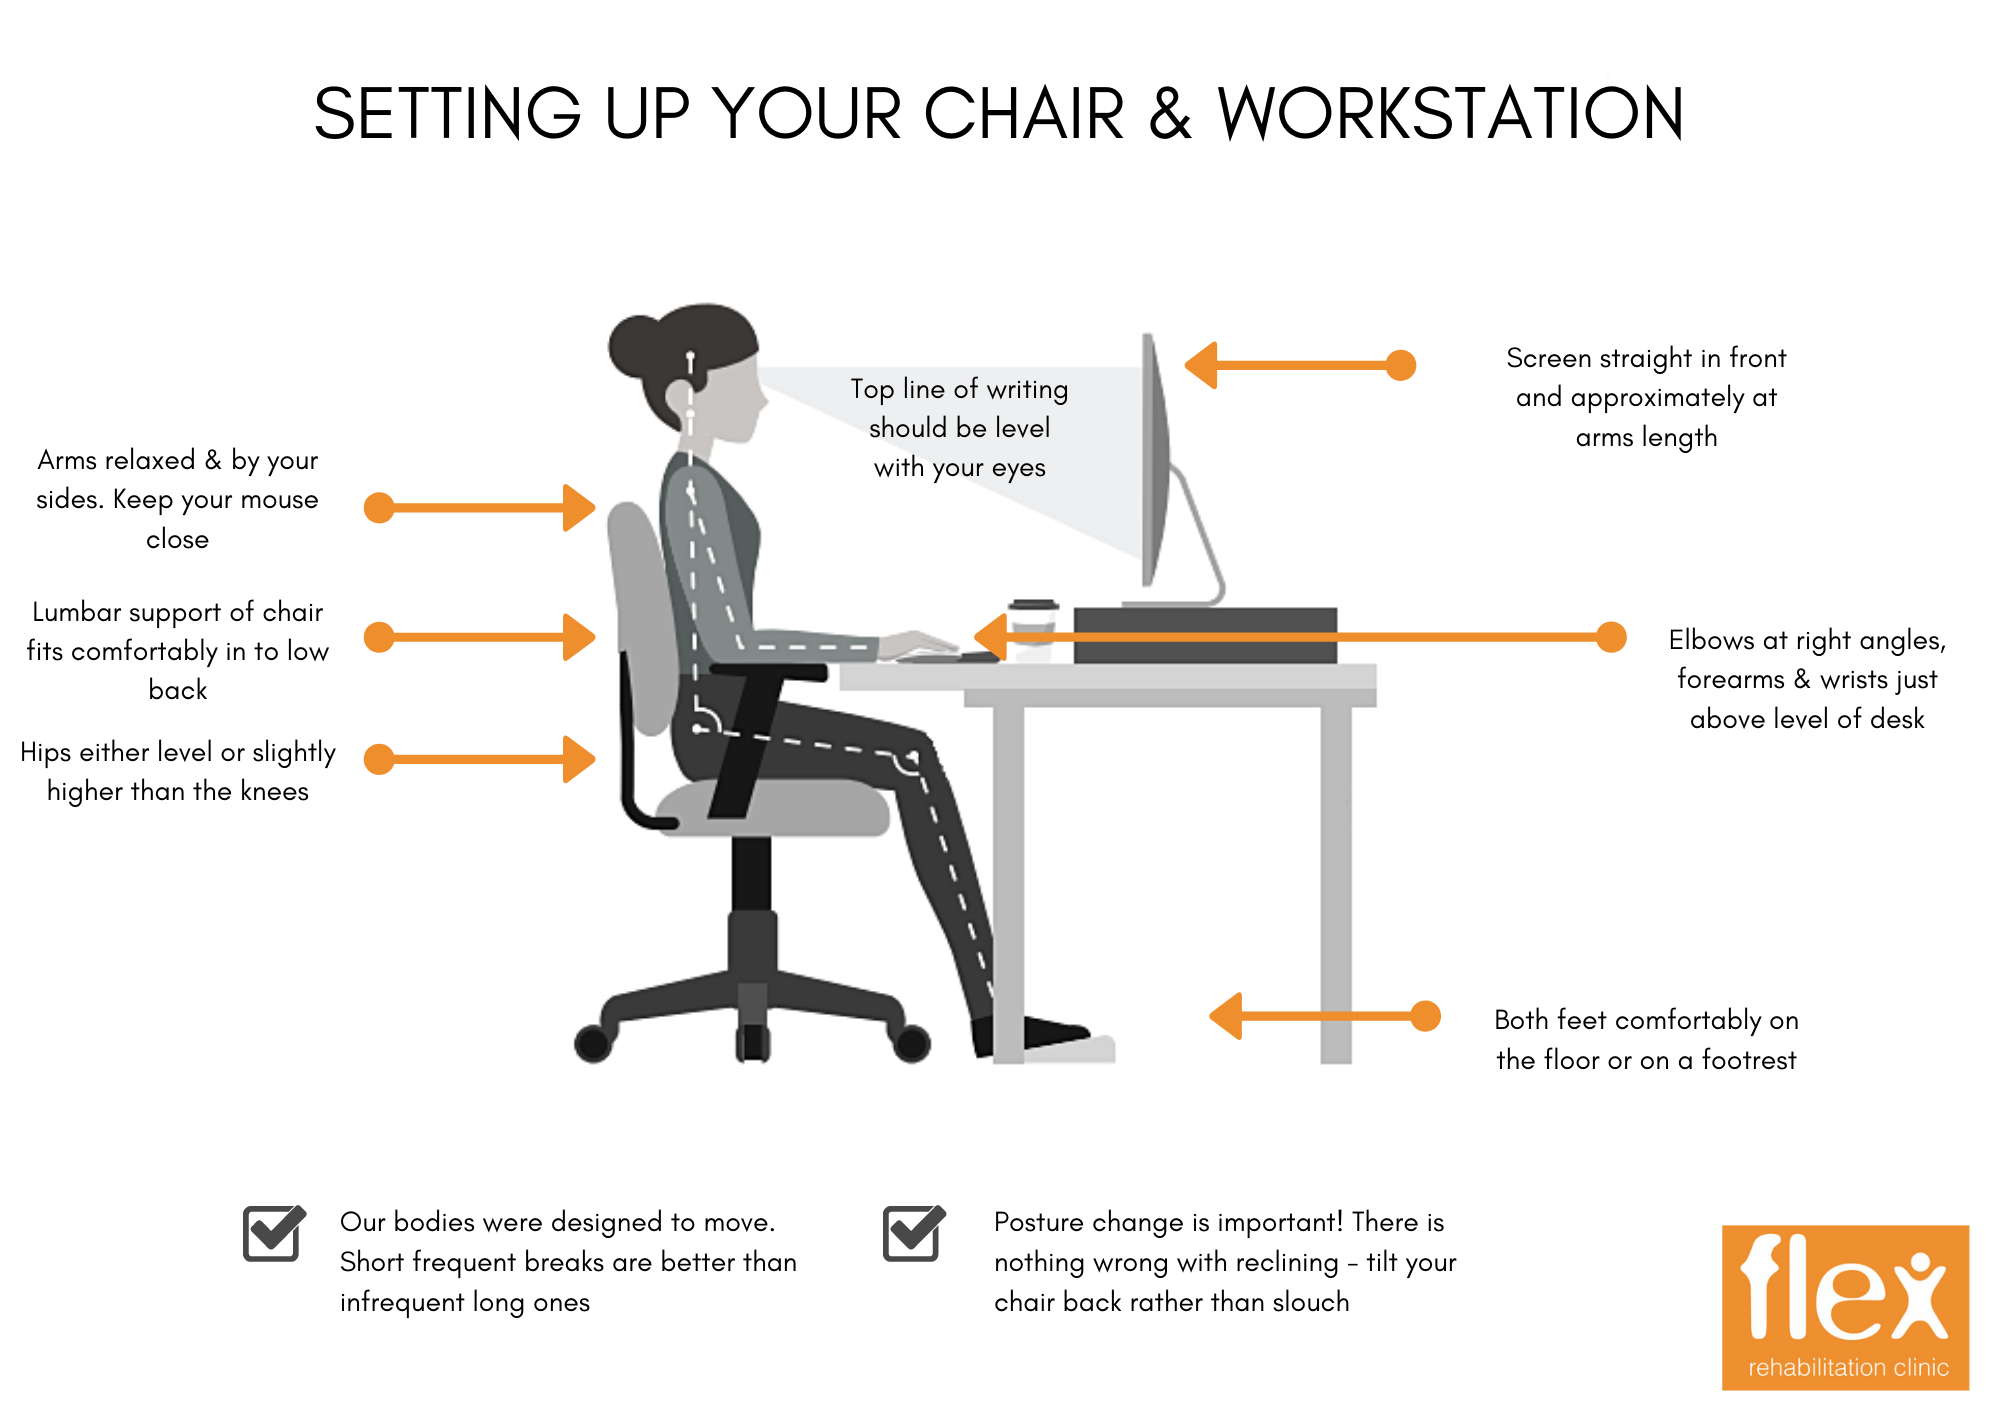 SETTING-UP-YOUR-CHAIR-WORKSTATION.png#as